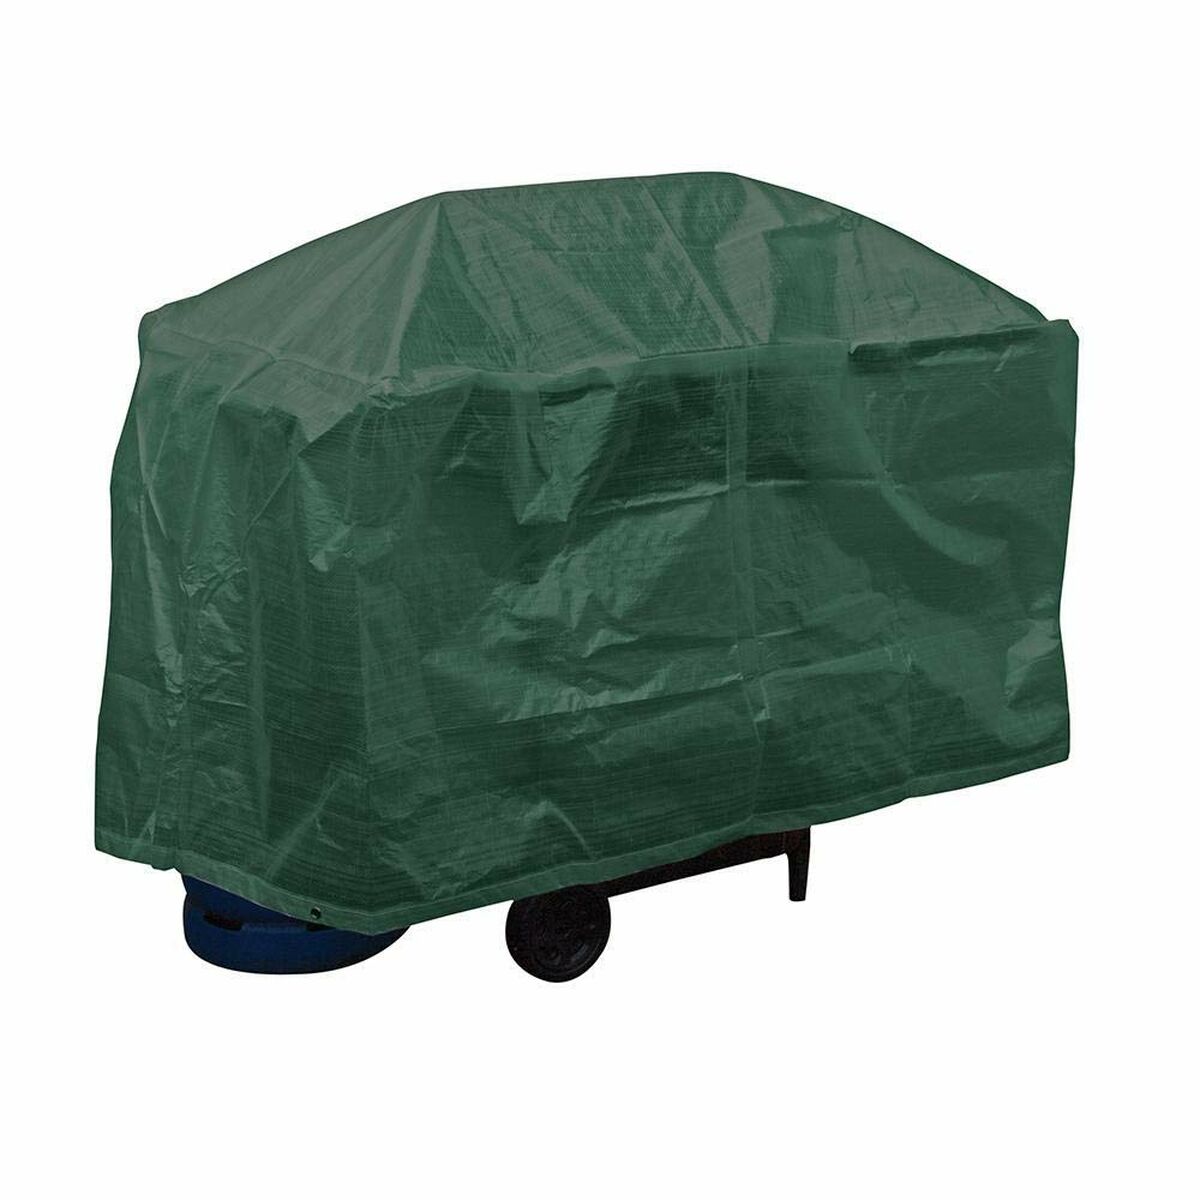 Protective Cover for Barbecue Altadex Green Polyethylene 103 x 58 x 58 cm